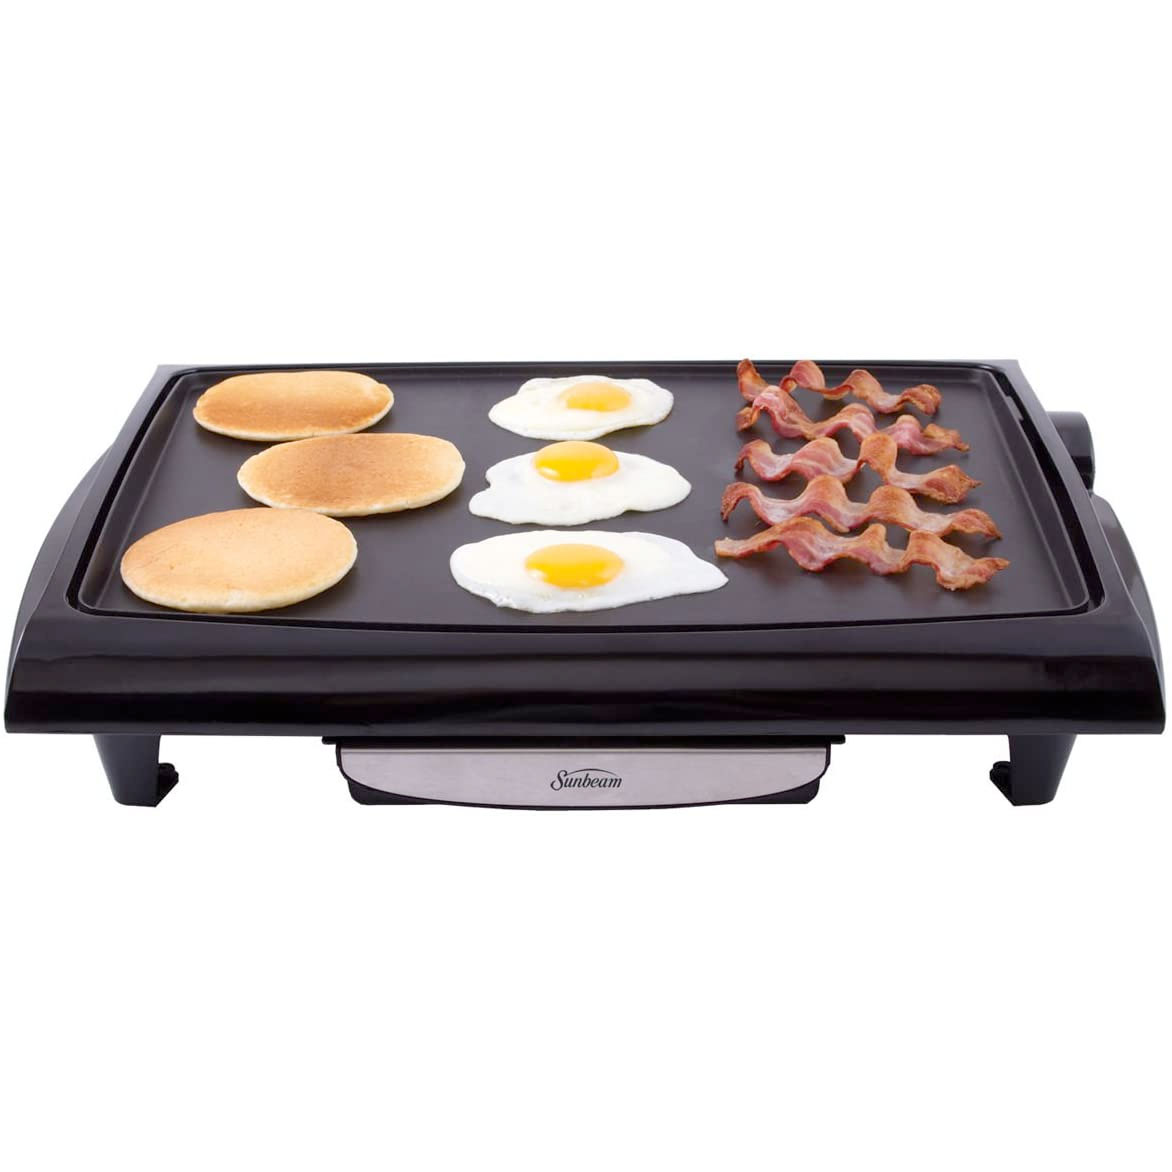 Amazon：Sunbeam 14-Inch X 18-Inch Non-Stick Electric Griddle只卖$28.88